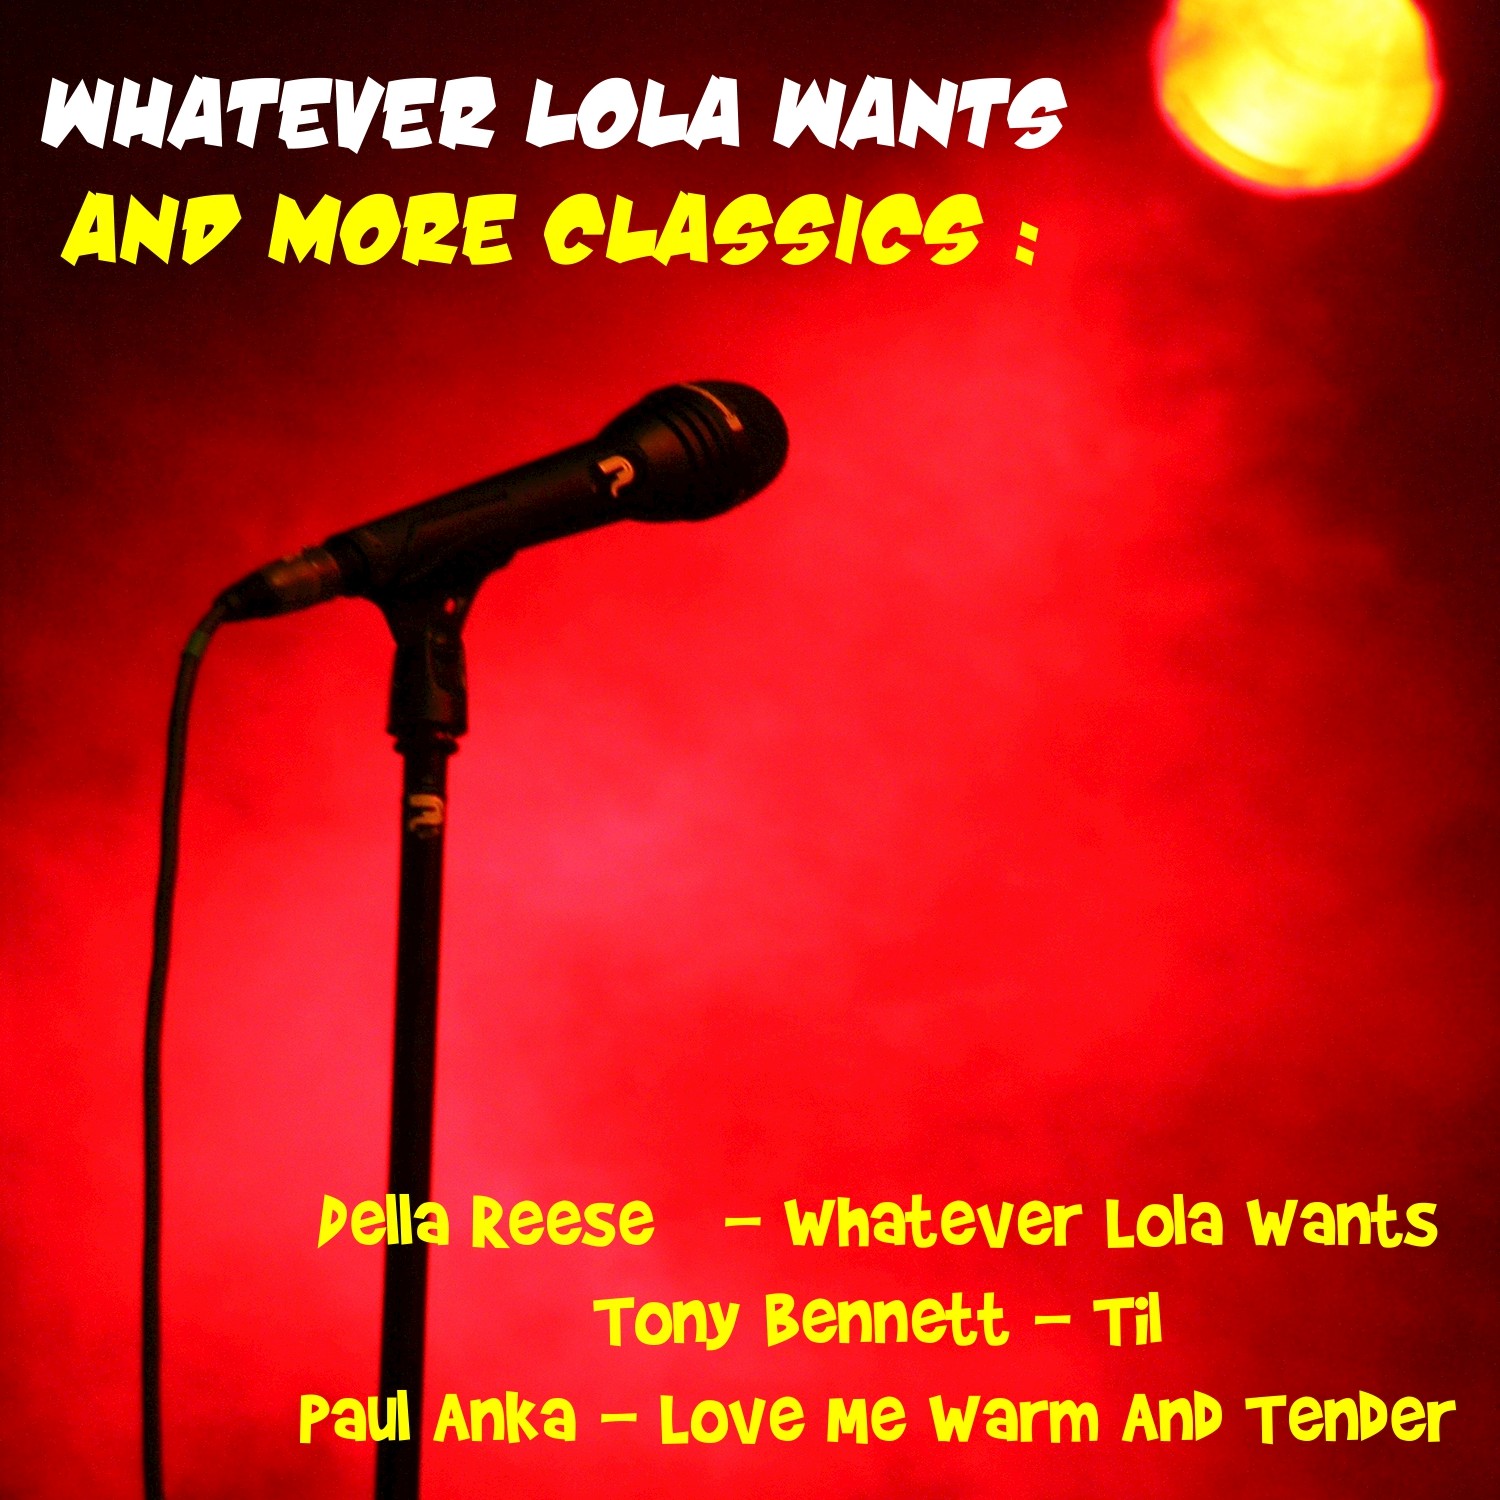 Whatever Lola Wants and More Classics